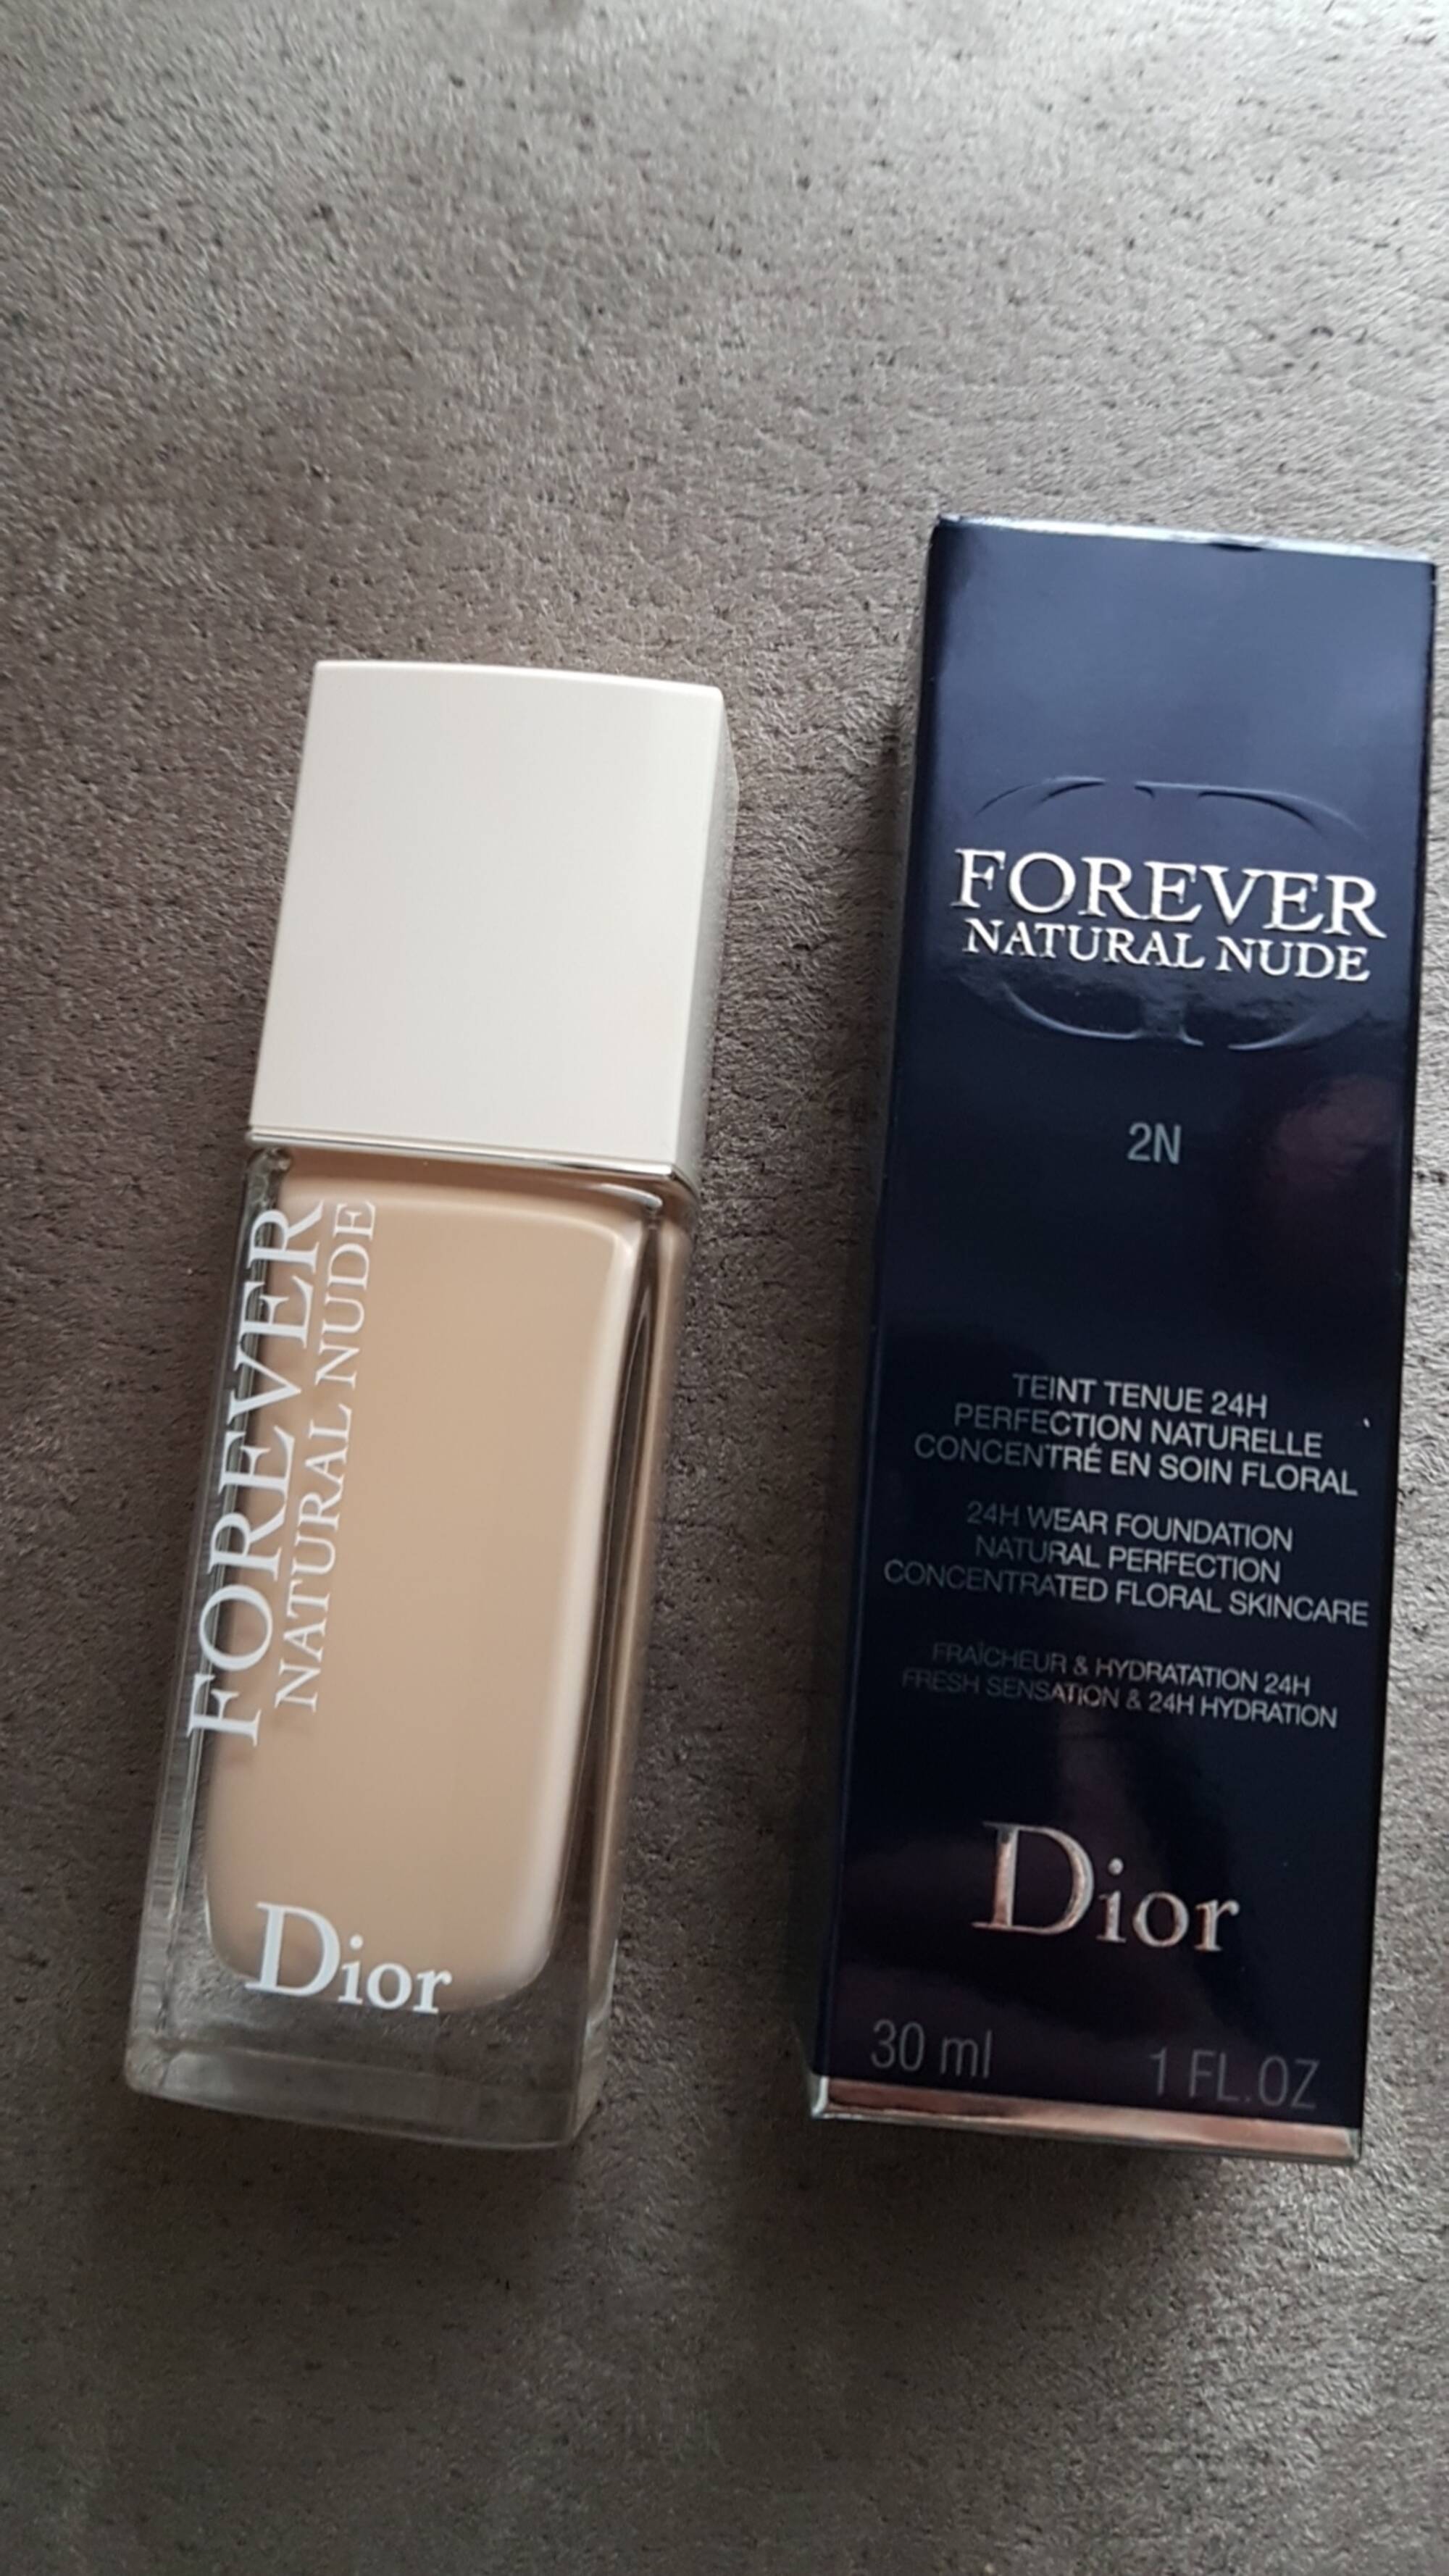 DIOR - Forever natural nude 